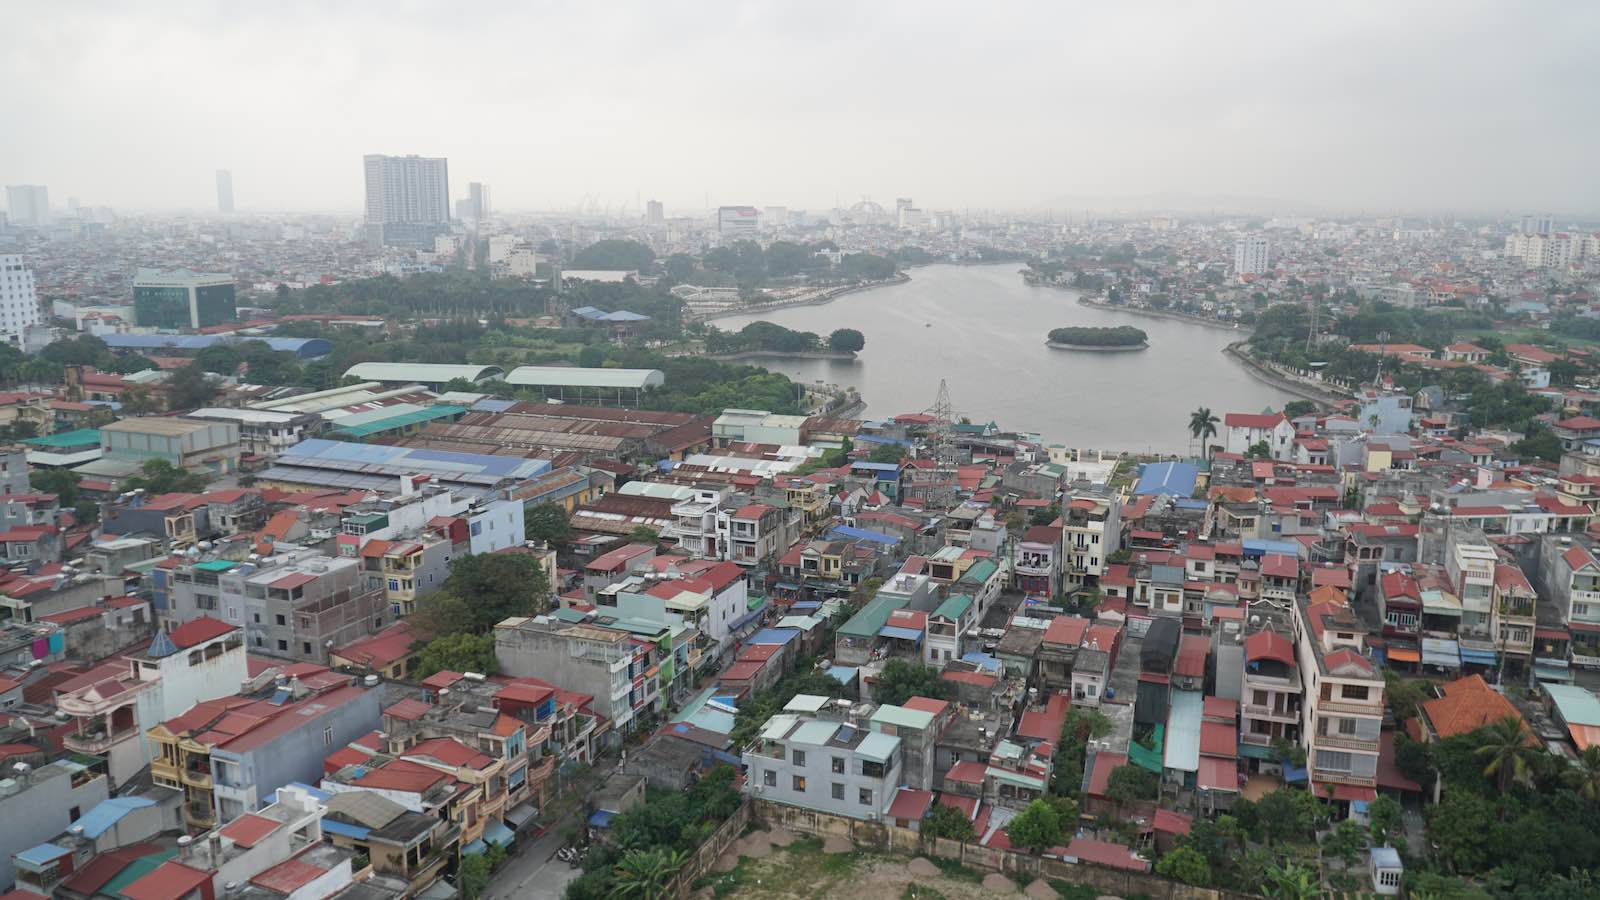 Most of the English students were also medical students and they took me around to their university. This is a birds eye view of Hai Phong from the top of the medical school building. It's mostly an industrial, local town so I got to experience a lot of local flavors and culture that wasn't just gilded for tourism, which I love.